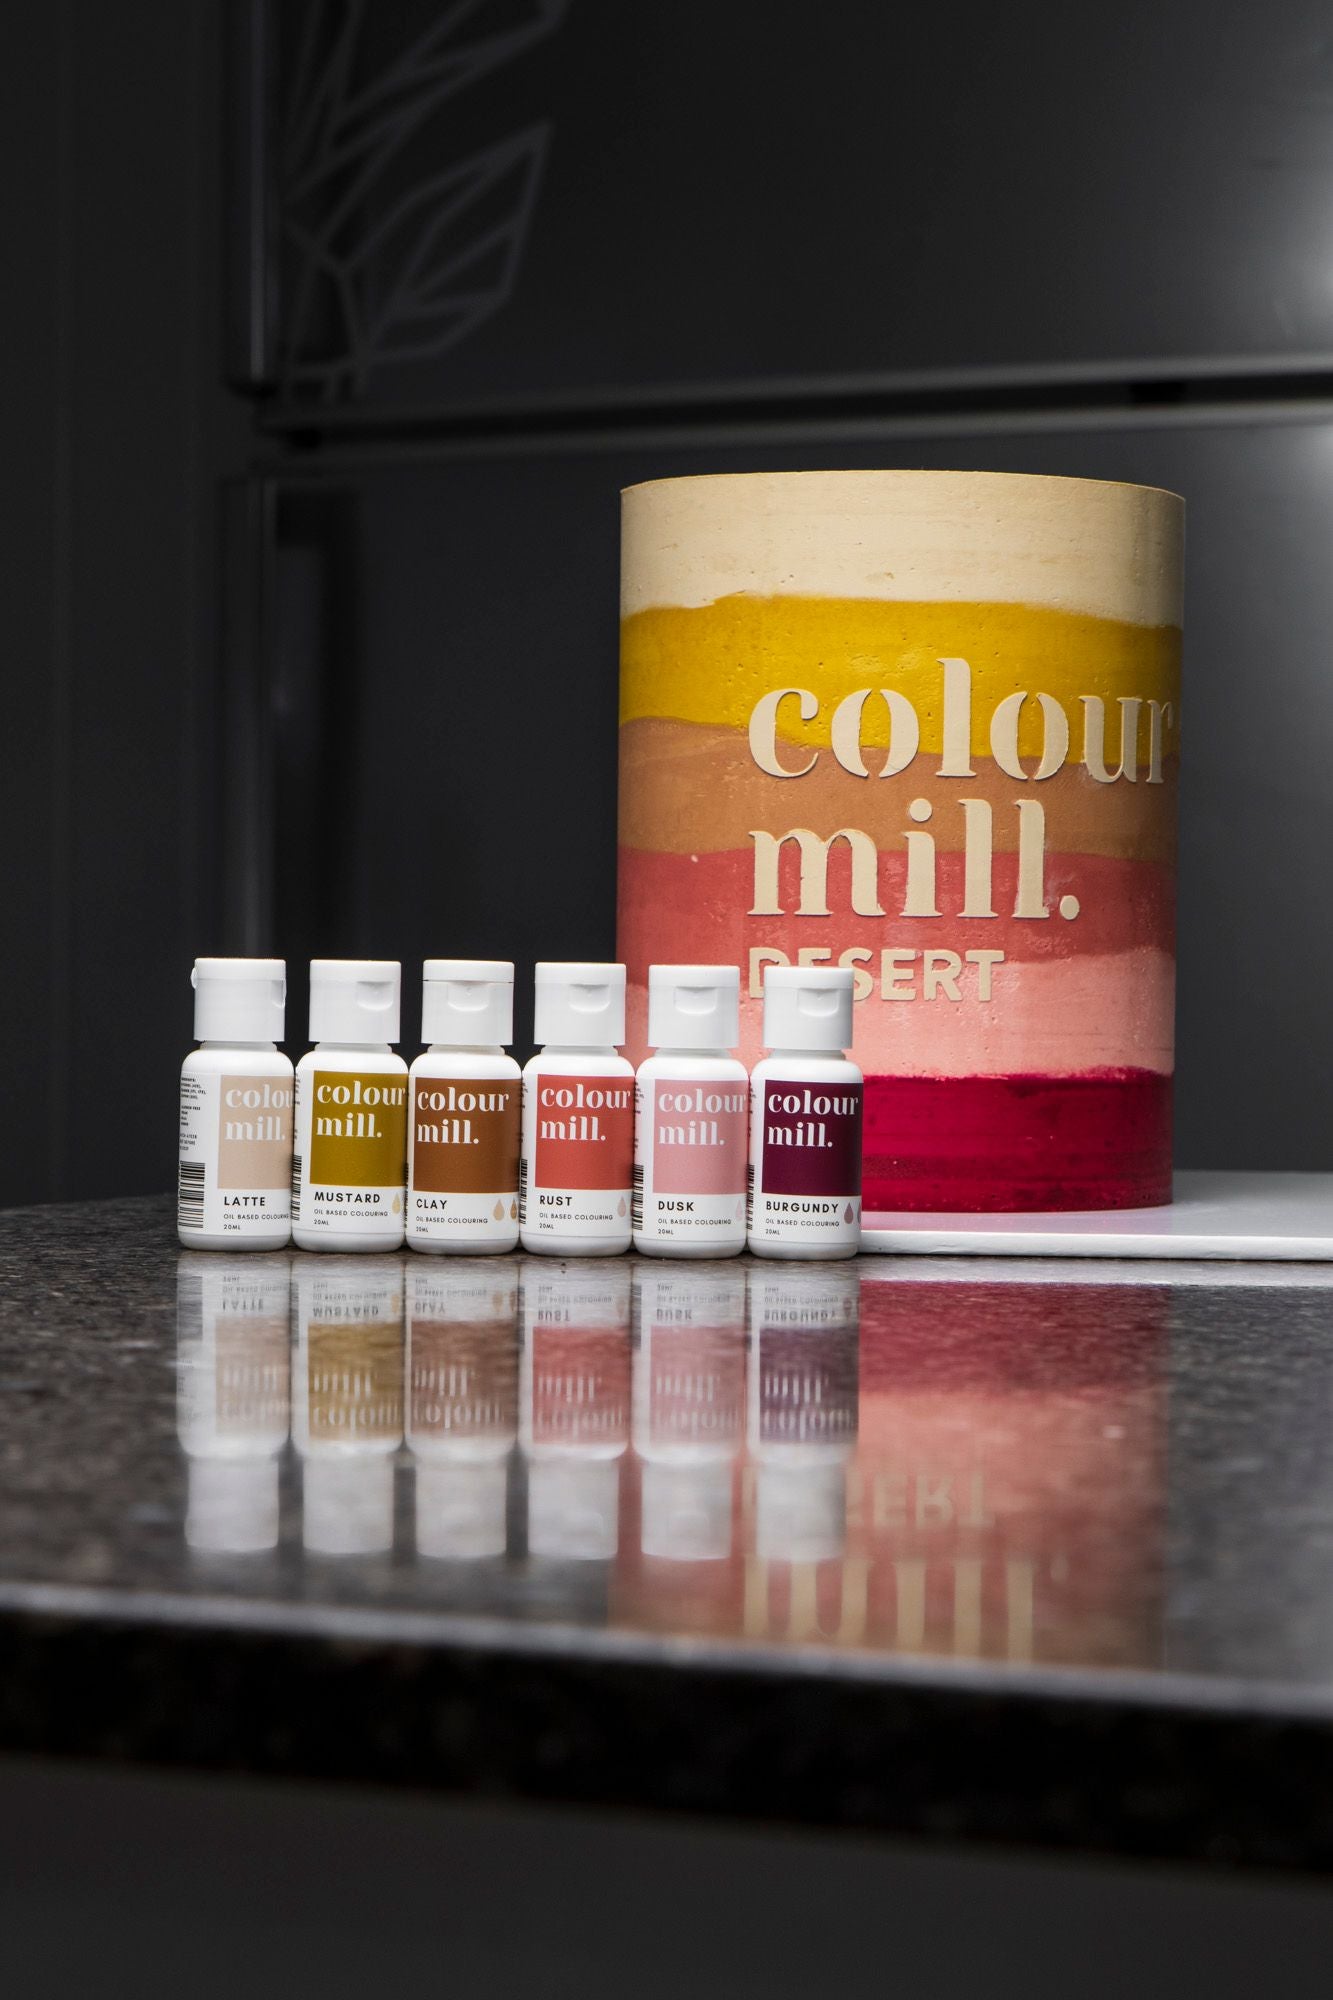 Candy Colour Mill Oil Based Food Color